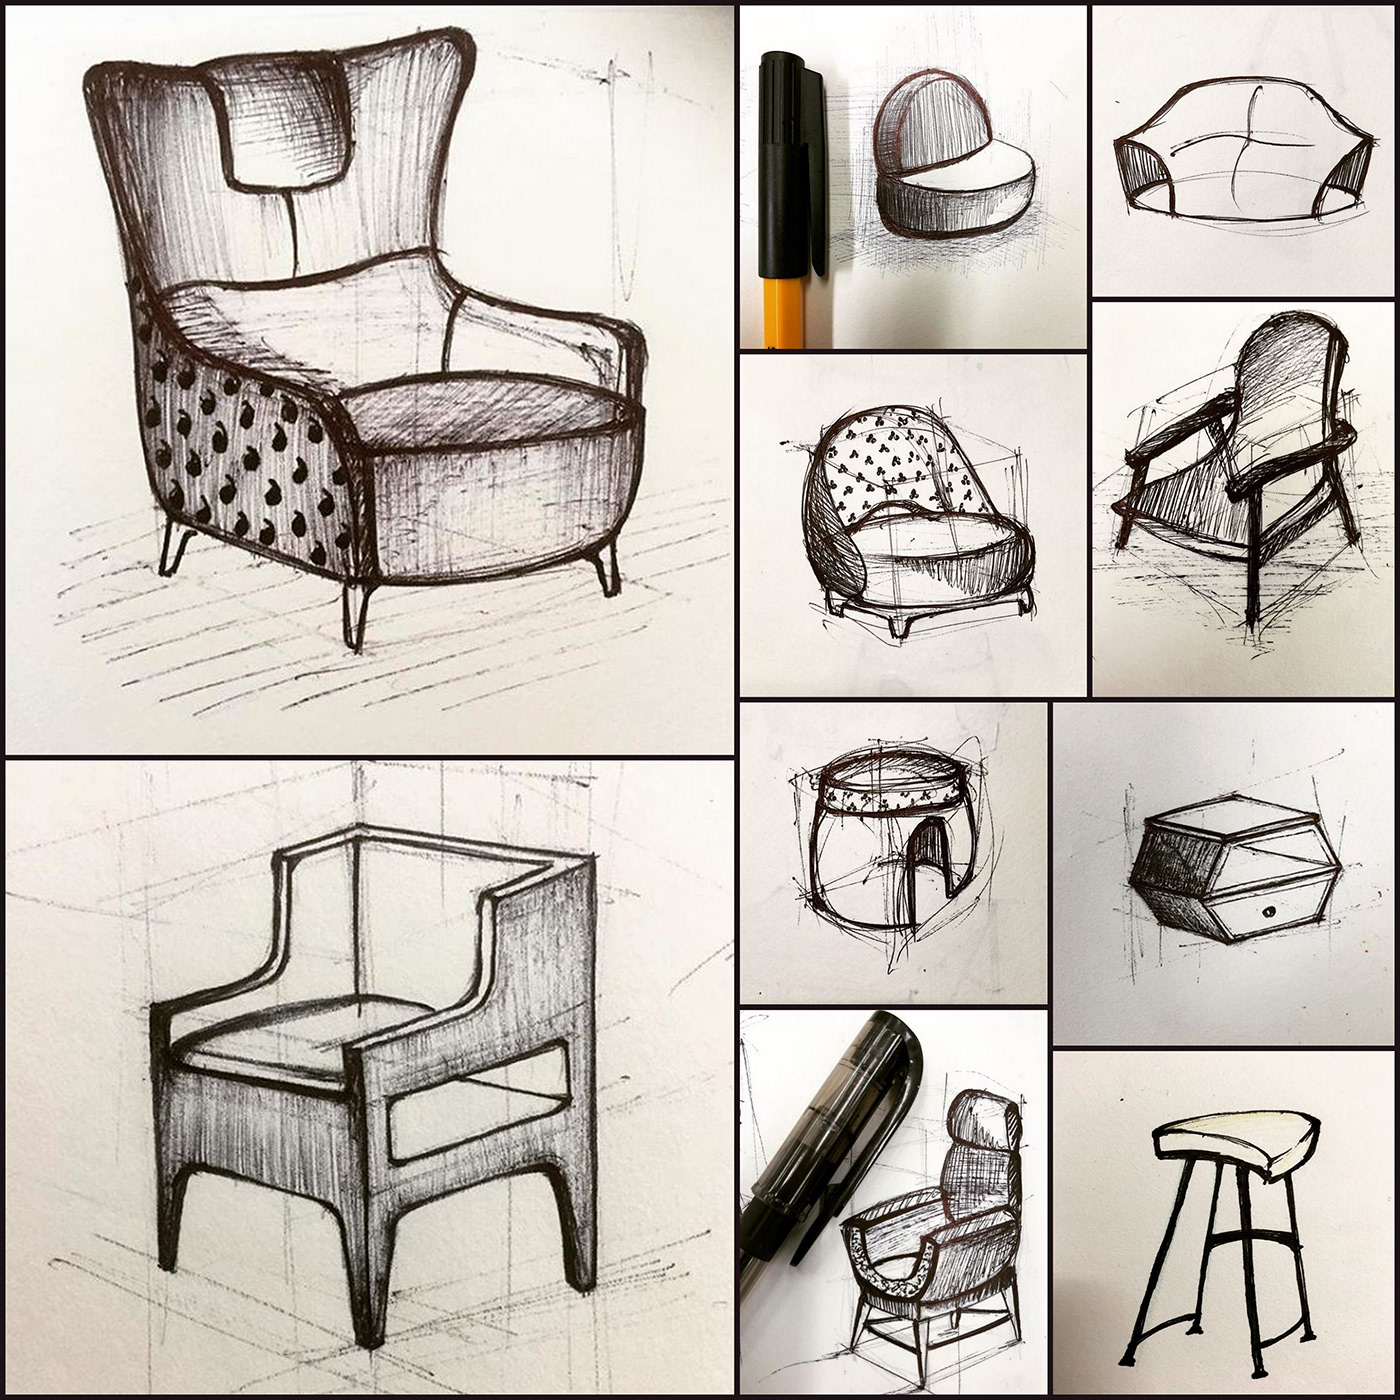 Image may contain: furniture, chair and sketch